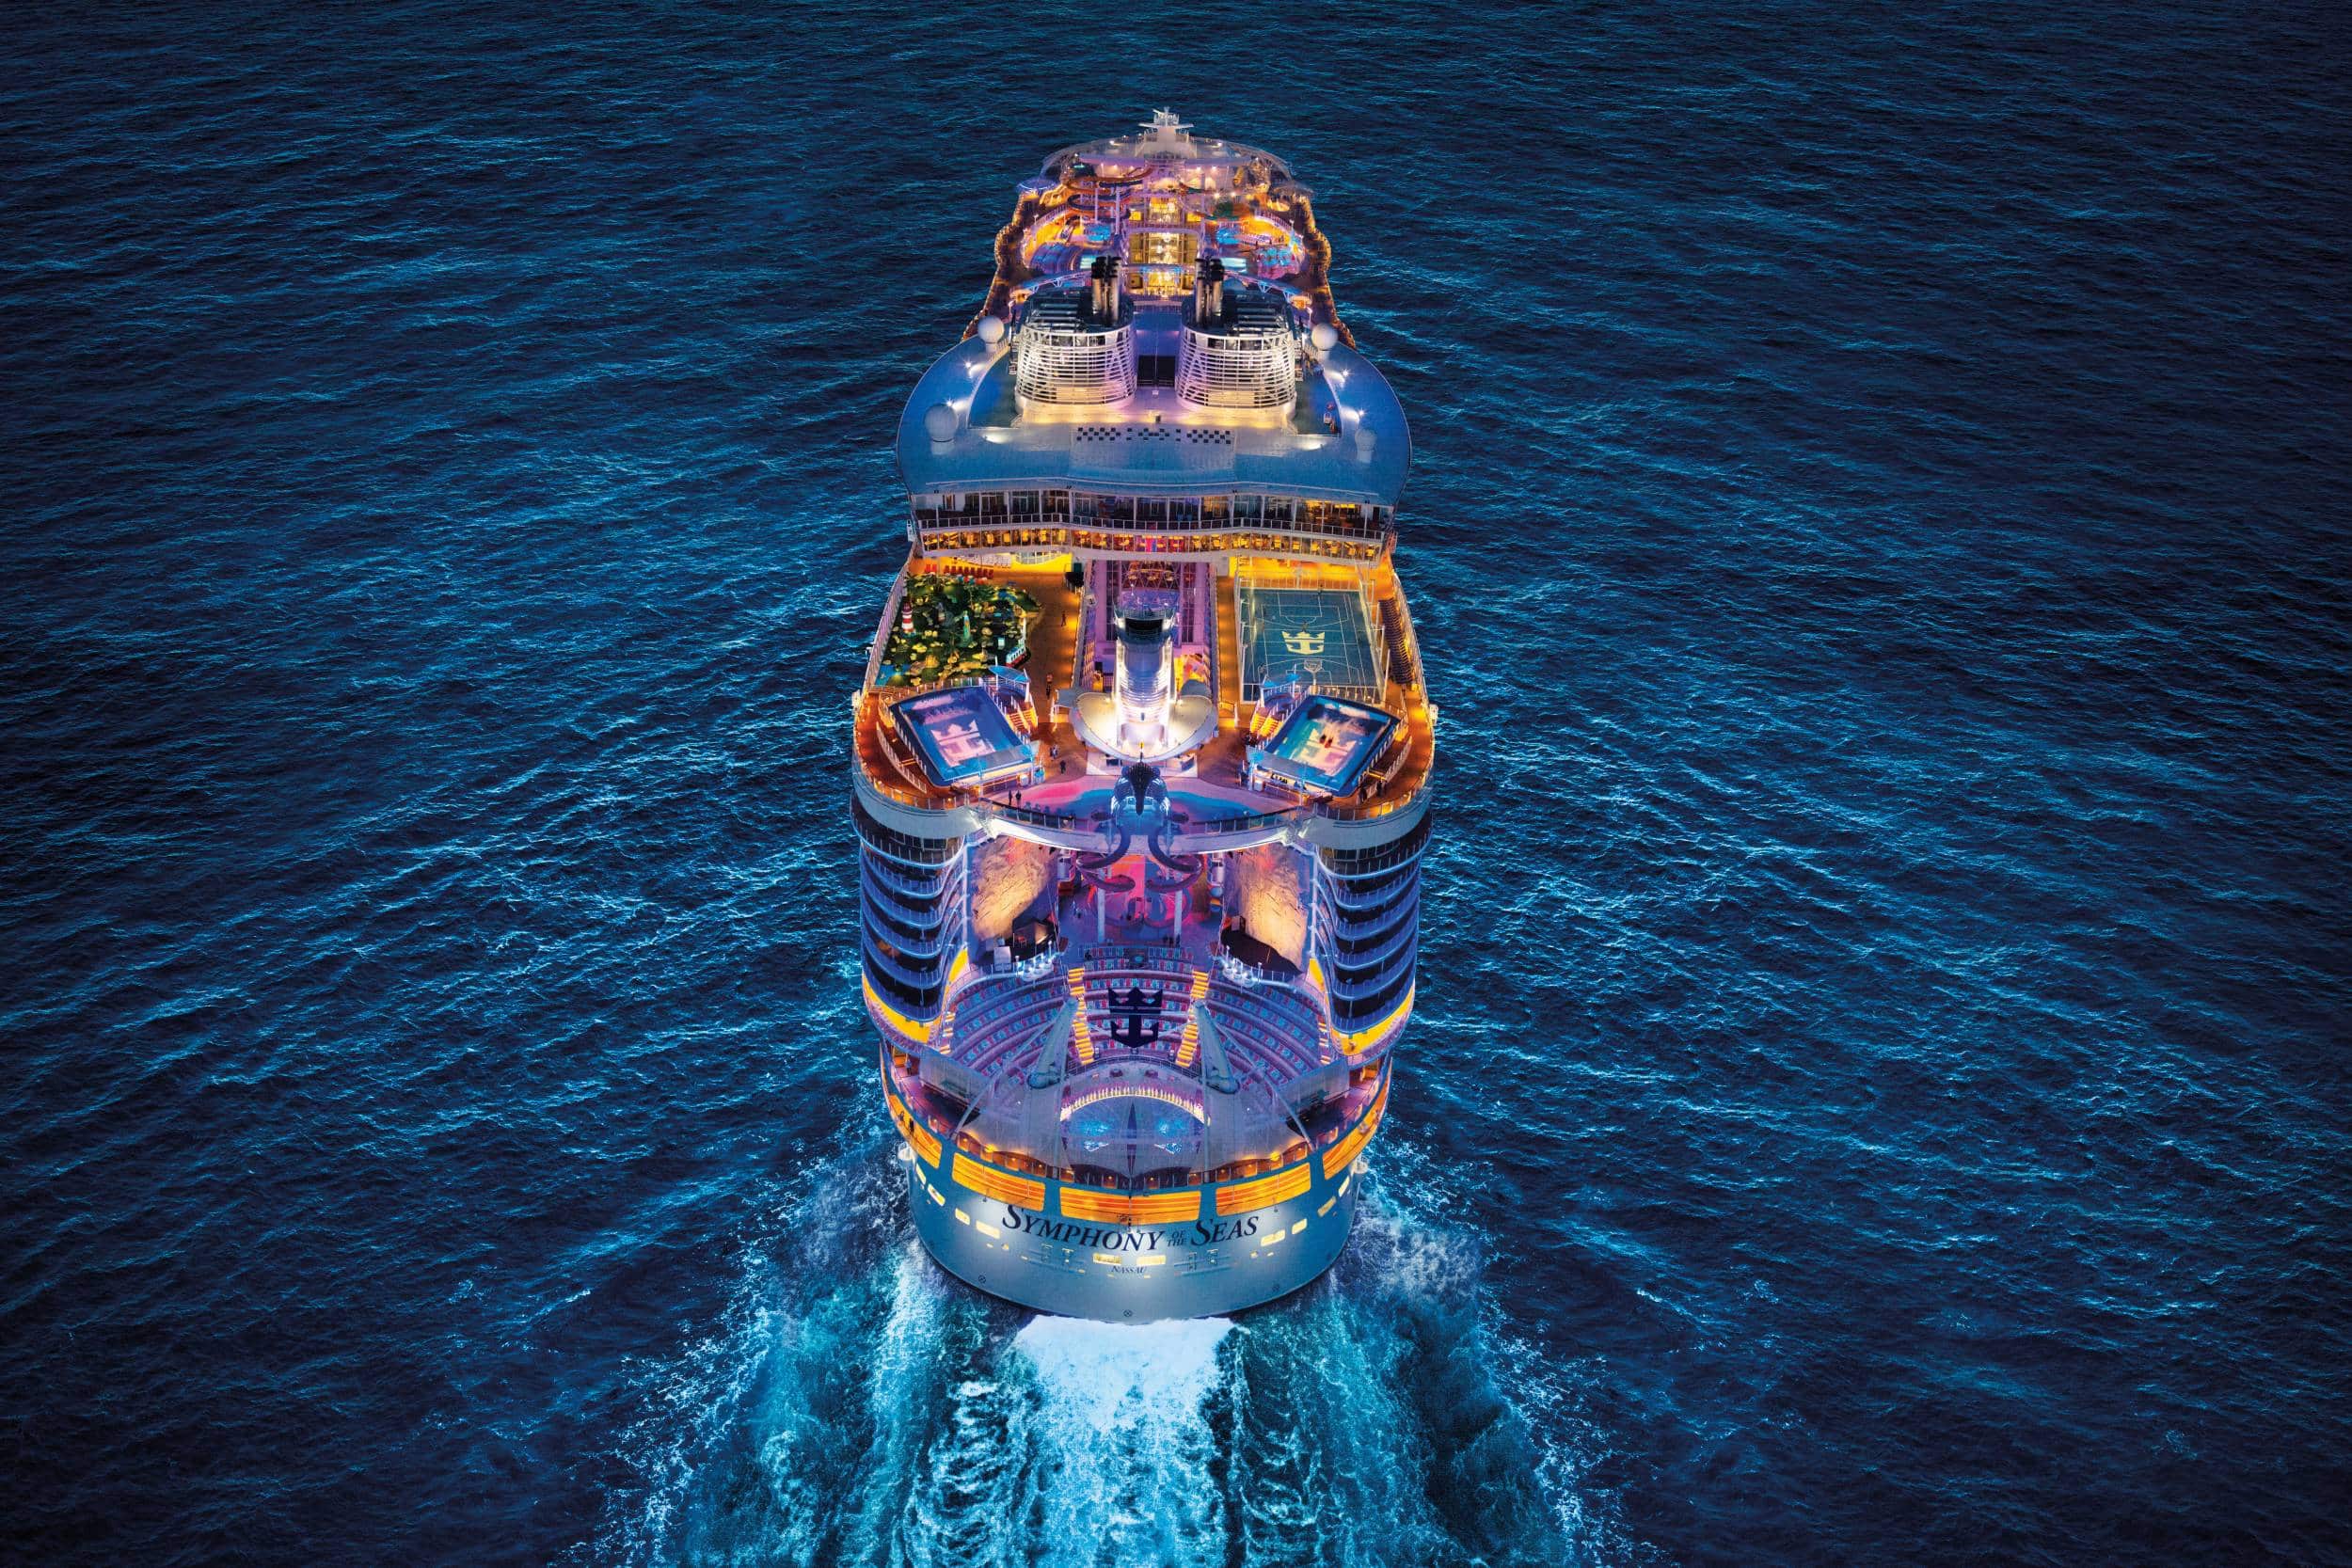 Spectrum of the Seas cruise out of Singapore ship at night